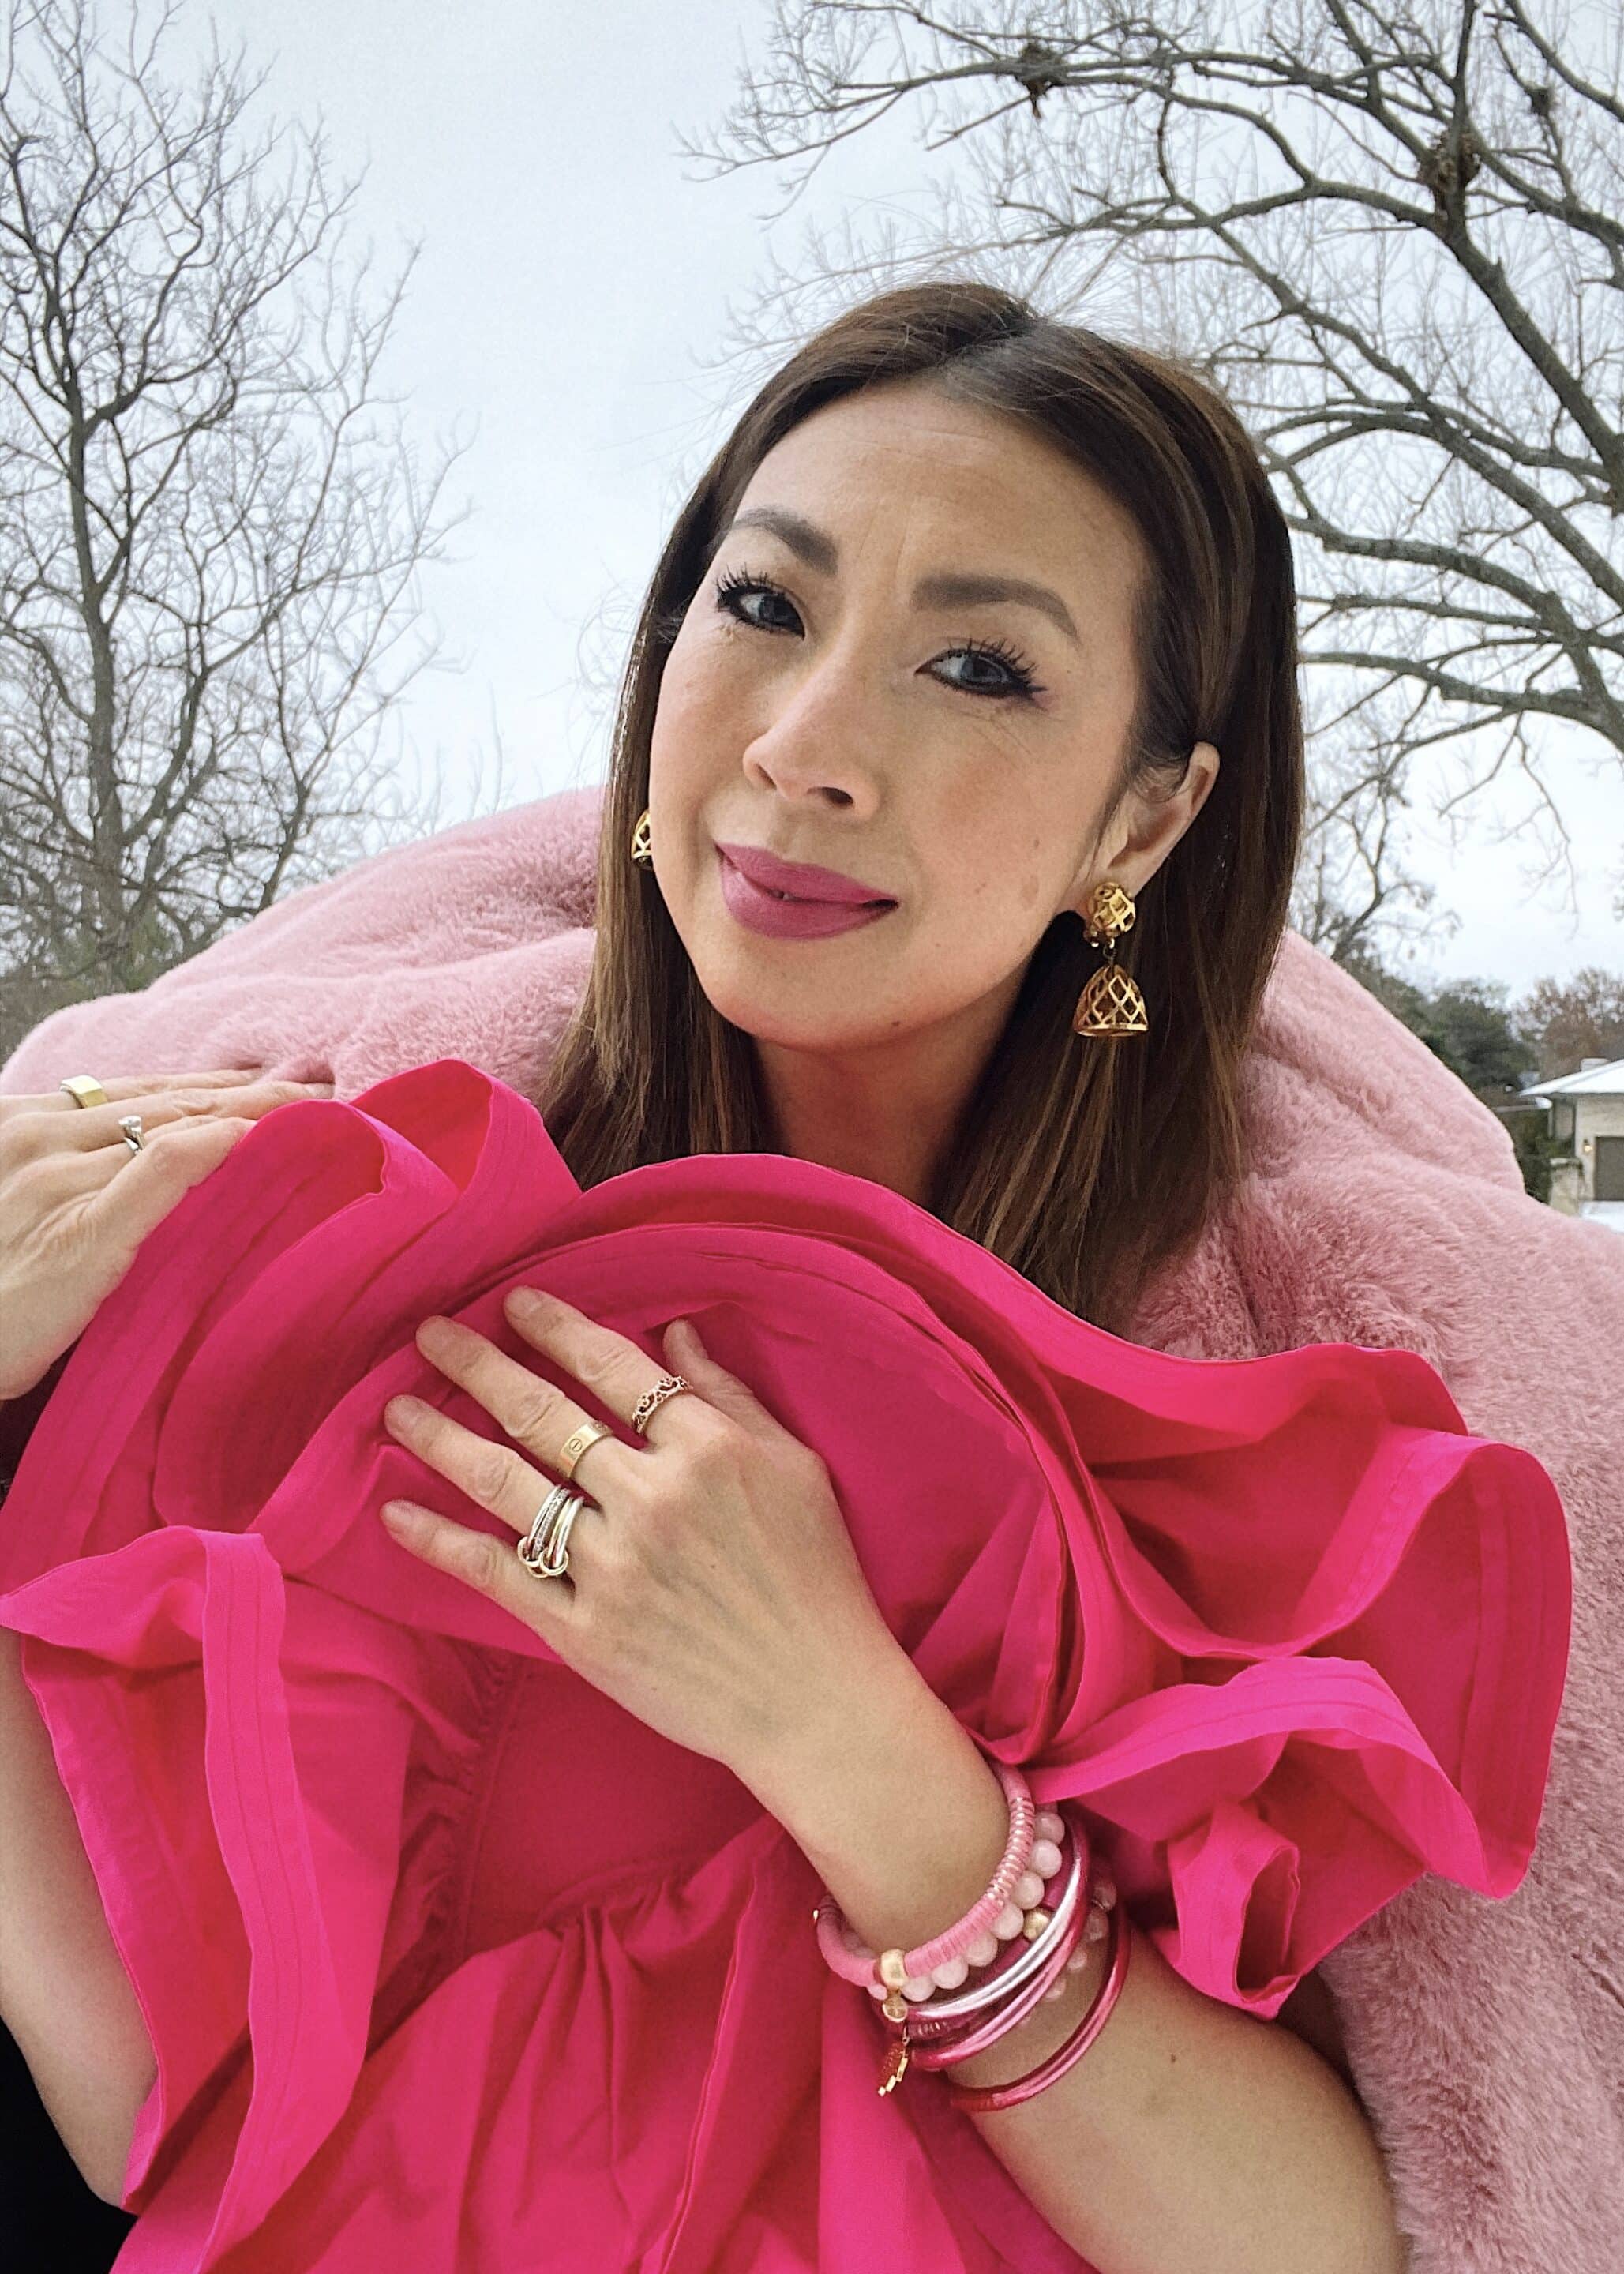 style of sam in pink HM metaverse ruffle top, maison ESSENTIELE silk, chanel birdcage earrings, budhagirl bracelets, apparis faux fur coat, pink valentines day outfit idea